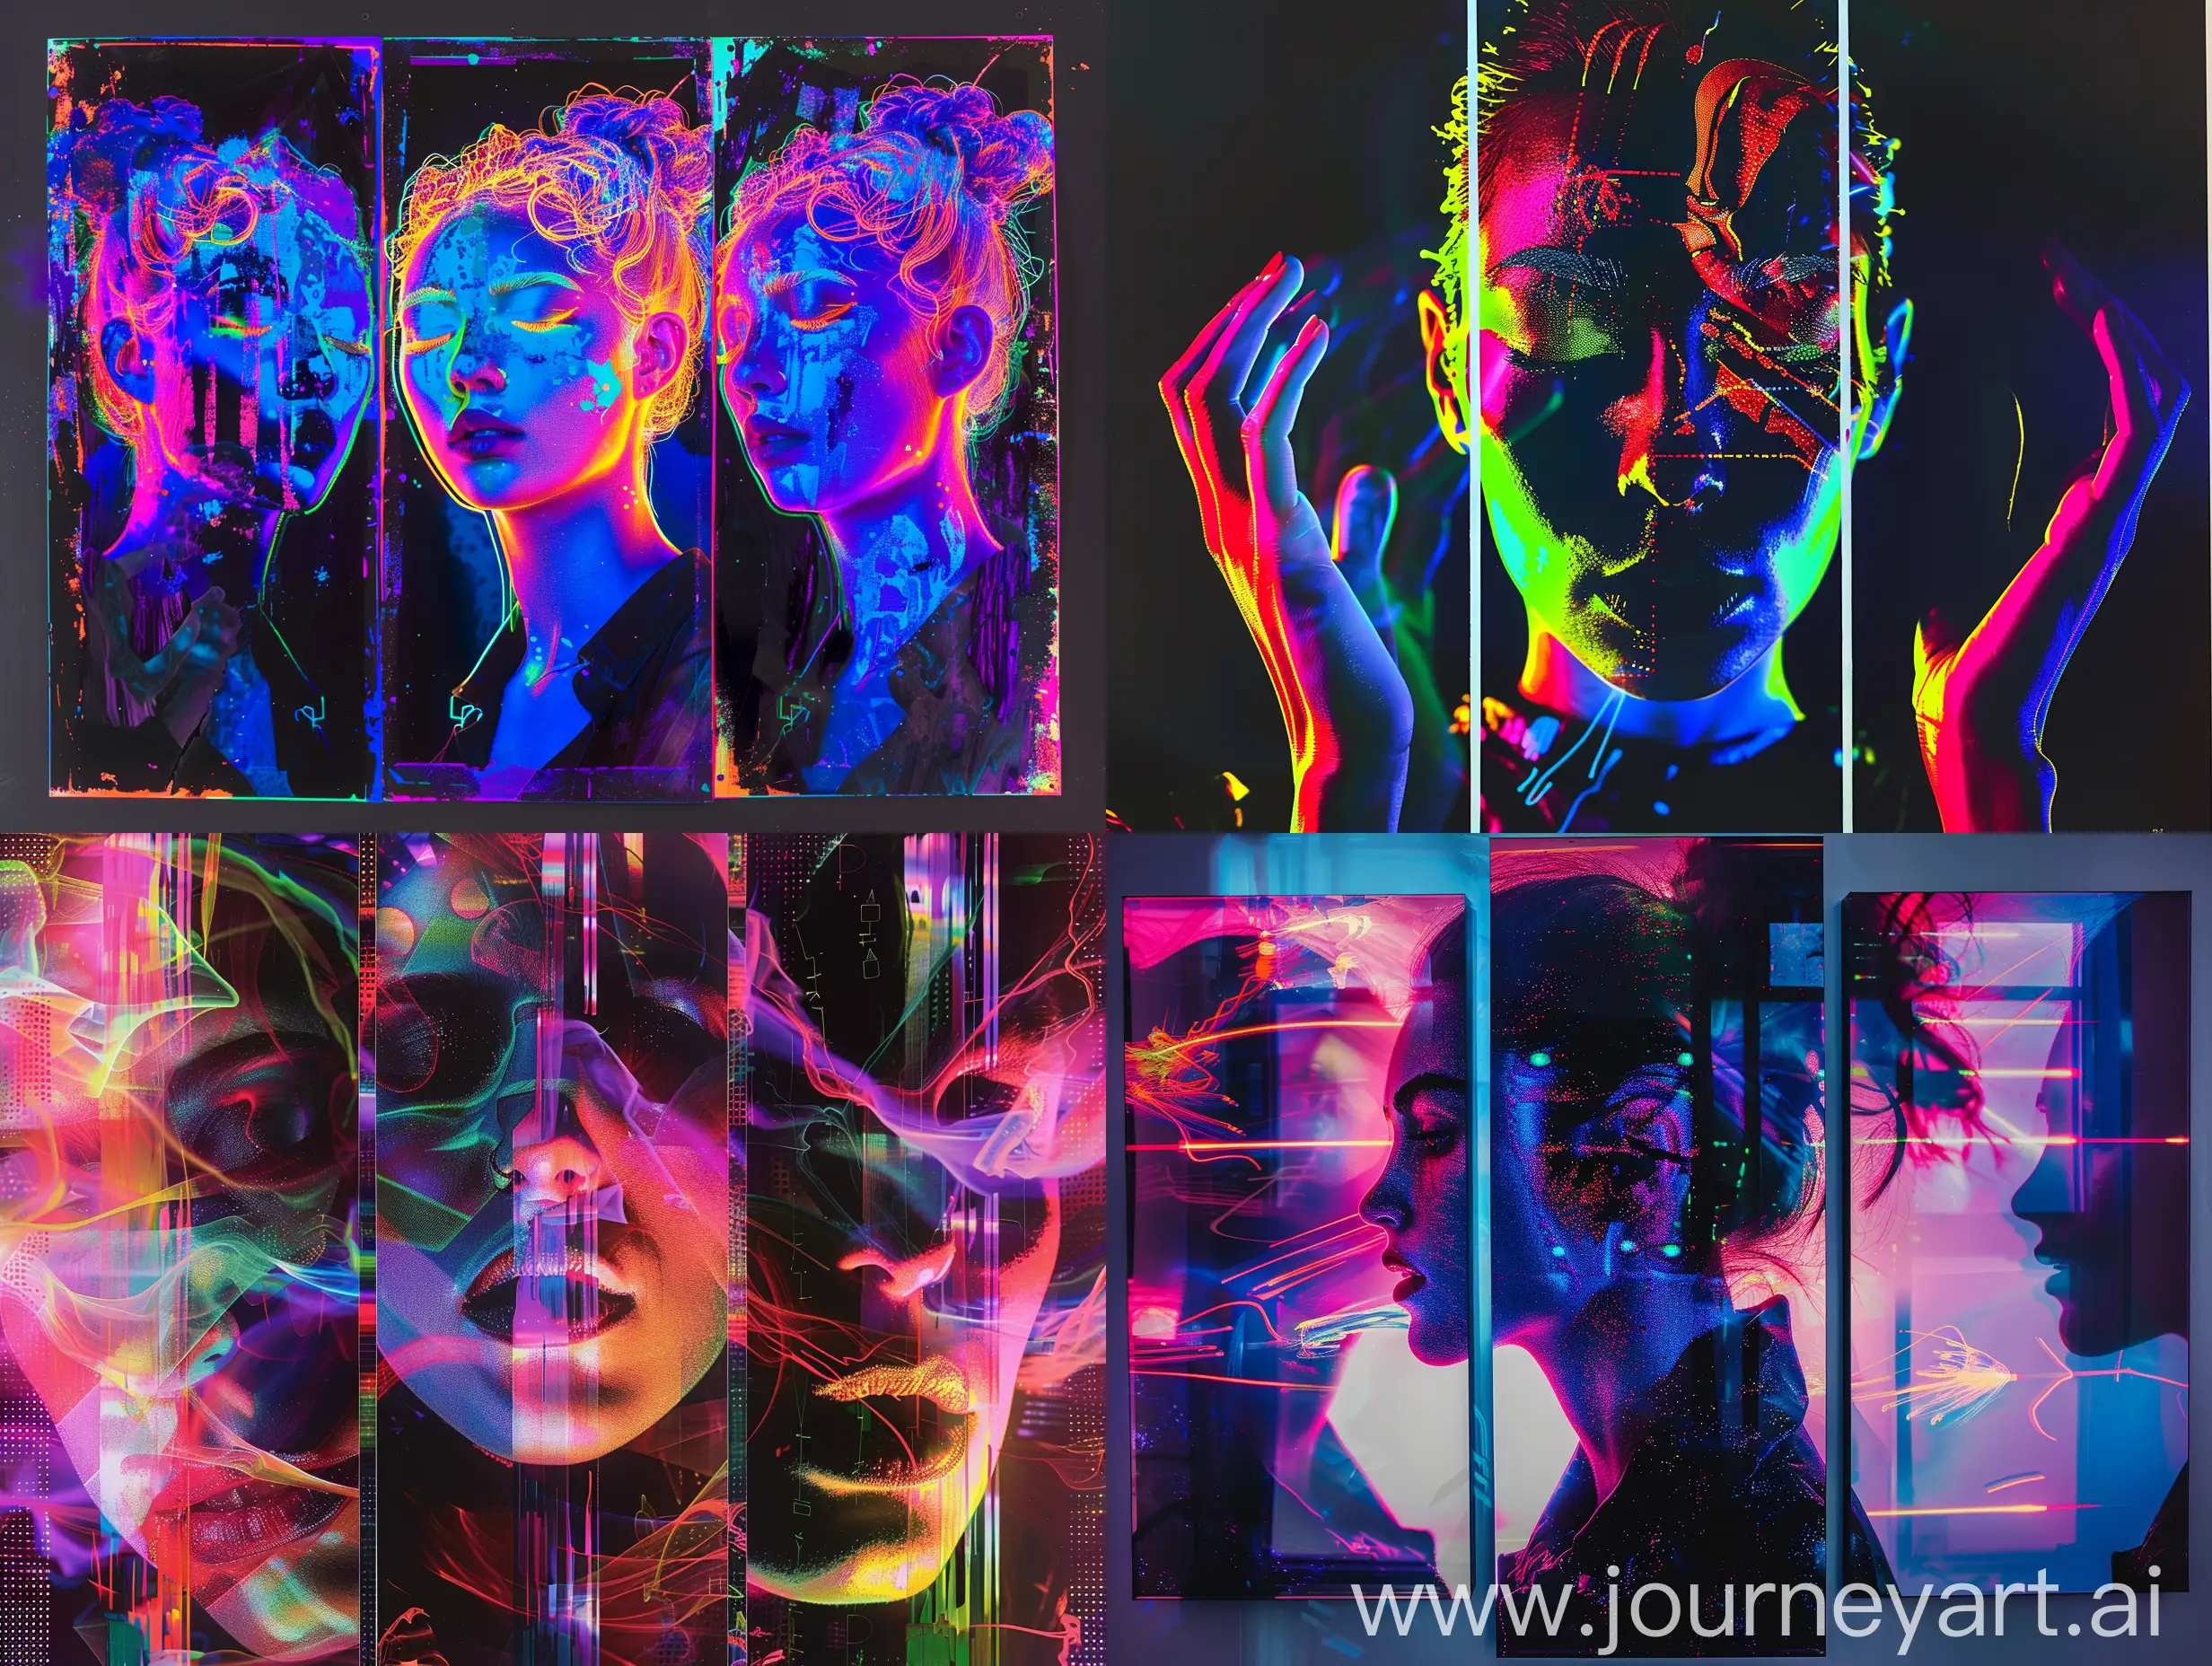 Shifting spectra, mixed multimedia portrait photography in retro-glitch art style, distorted graphics, spectacular neon lighting, additional contrast, cinematic risograph on three panels